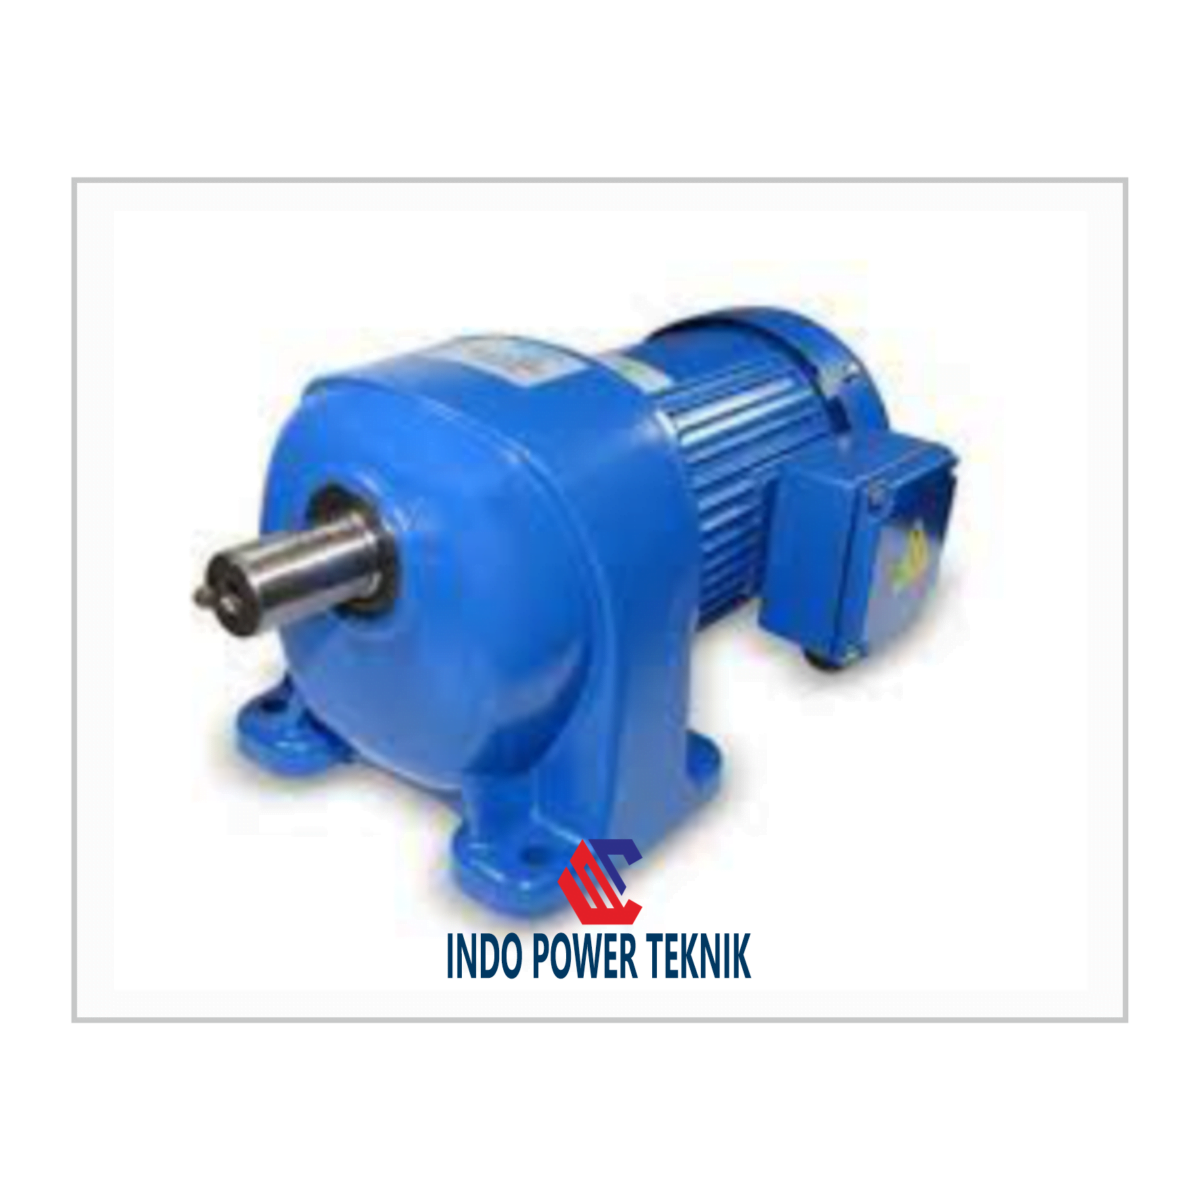 INDO POWER TEKNIK gearbox-helical YUEMA HELICAL GEARBOX MINI ALL CATEGORIES GEARBOXS  yuema motor Yuema mini helical gear type CHCZ yuema mini helical Yuema Helical Gear Motor type G3LS Yuema Helical Gear Motor type G3LM Yuema Helical Gear Motor type G3L Yuema Helical Gear Motor type G3FS Yuema Helical Gear Motor type G3FM Yuema Helical gear motor type CHCF.. HS Yuema Helical gear motor type CHCF yuema gearbox mini worm gear electric motor worm gear pt distributor motorized worm gear miniature gear pump mini worm gear mini geared motor mini gear pump indo power teknik helical worm gear motor helical worm gear helical motor helical mini helical gearbox helical gear reducer helical gear pump helical gear motor helical gear geared electric motors gearbox mini gearbox gear products electric worm gear electric motor reducer electric motor gear reducer electric motor distributors electric motor electric gear motor electric gear distributor yuema electric motor distributor yuema Agen Yuema Helical Mini yogyakarta Agen Yuema Helical Mini wonosobo Agen Yuema Helical Mini wonogiri Agen Yuema Helical Mini temanggung Agen Yuema Helical Mini tegal Agen Yuema Helical Mini surakarta Agen Yuema Helical Mini sumatra utara Agen Yuema Helical Mini sumatra selatan Agen Yuema Helical Mini sumatra barat Agen Yuema Helical Mini sulawesi utara Agen Yuema Helical Mini sulawesi tenggara Agen Yuema Helical Mini sulawesi tengah Agen Yuema Helical Mini sulawesi selatan Agen Yuema Helical Mini sulawesi barat Agen Yuema Helical Mini sukoharjo Agen Yuema Helical Mini sragen Agen Yuema Helical Mini semarang Agen Yuema Helical Mini salatiga Agen Yuema Helical Mini riau Agen Yuema Helical Mini rembang Agen Yuema Helical Mini purworejo Agen Yuema Helical Mini purwodadi Agen Yuema Helical Mini purbalingga Agen Yuema Helical Mini pemalang Agen Yuema Helical Mini pekalongan Agen Yuema Helical Mini pati Agen Yuema Helical Mini papua barat Agen Yuema Helical Mini papua Agen Yuema Helical Mini nusa tenggara timur Agen Yuema Helical Mini nusa tenggara barat Agen Yuema Helical Mini maluku utara Agen Yuema Helical Mini maluku Agen Yuema Helical Mini magelang Agen Yuema Helical Mini lampung Agen Yuema Helical Mini kudus Agen Yuema Helical Mini klaten Agen Yuema Helical Mini kepulauan riau Agen Yuema Helical Mini kendal Agen Yuema Helical Mini kebumen Agen Yuema Helical Mini karanganyar Agen Yuema Helical Mini kalimantan utara Agen Yuema Helical Mini kalimantan timur Agen Yuema Helical Mini kalimantan tengah Agen Yuema Helical Mini kalimantan selatan Agen Yuema Helical Mini kalimantan barat Agen Yuema Helical Mini jepara Agen Yuema Helical Mini jawa timur Agen Yuema Helical Mini jawa tengah Agen Yuema Helical Mini jawa barat Agen Yuema Helical Mini jambi Agen Yuema Helical Mini jakarta Agen Yuema Helical Mini gorontalo Agen Yuema Helical Mini demak Agen Yuema Helical Mini cilacap Agen Yuema Helical Mini brebes Agen Yuema Helical Mini boyolali Agen Yuema Helical Mini blora Agen Yuema Helical Mini bengkulu Agen Yuema Helical Mini batang Agen Yuema Helical Mini banyumas Agen Yuema Helical Mini banten Agen Yuema Helical Mini banjarnegara Agen Yuema Helical Mini bangka belitung Agen Yuema Helical Mini bali Agen Yuema Helical Mini aceh agen yuema electric motor 